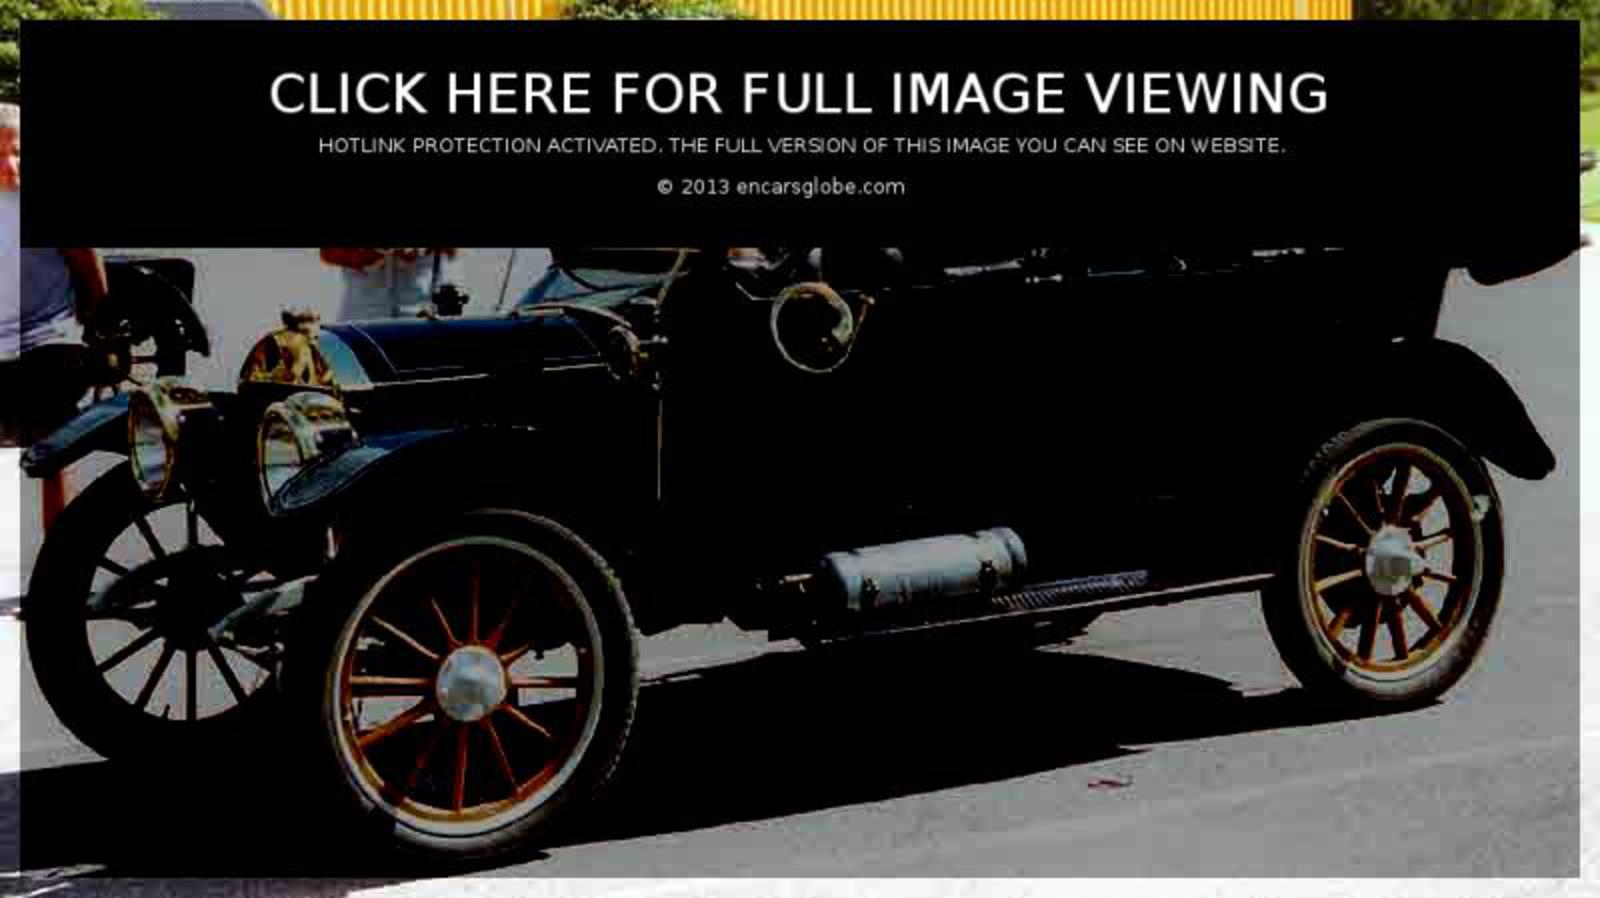 Maxwell Model 4 1 Ton Chassis Photo Gallery: Photo #01 out of 9 ...